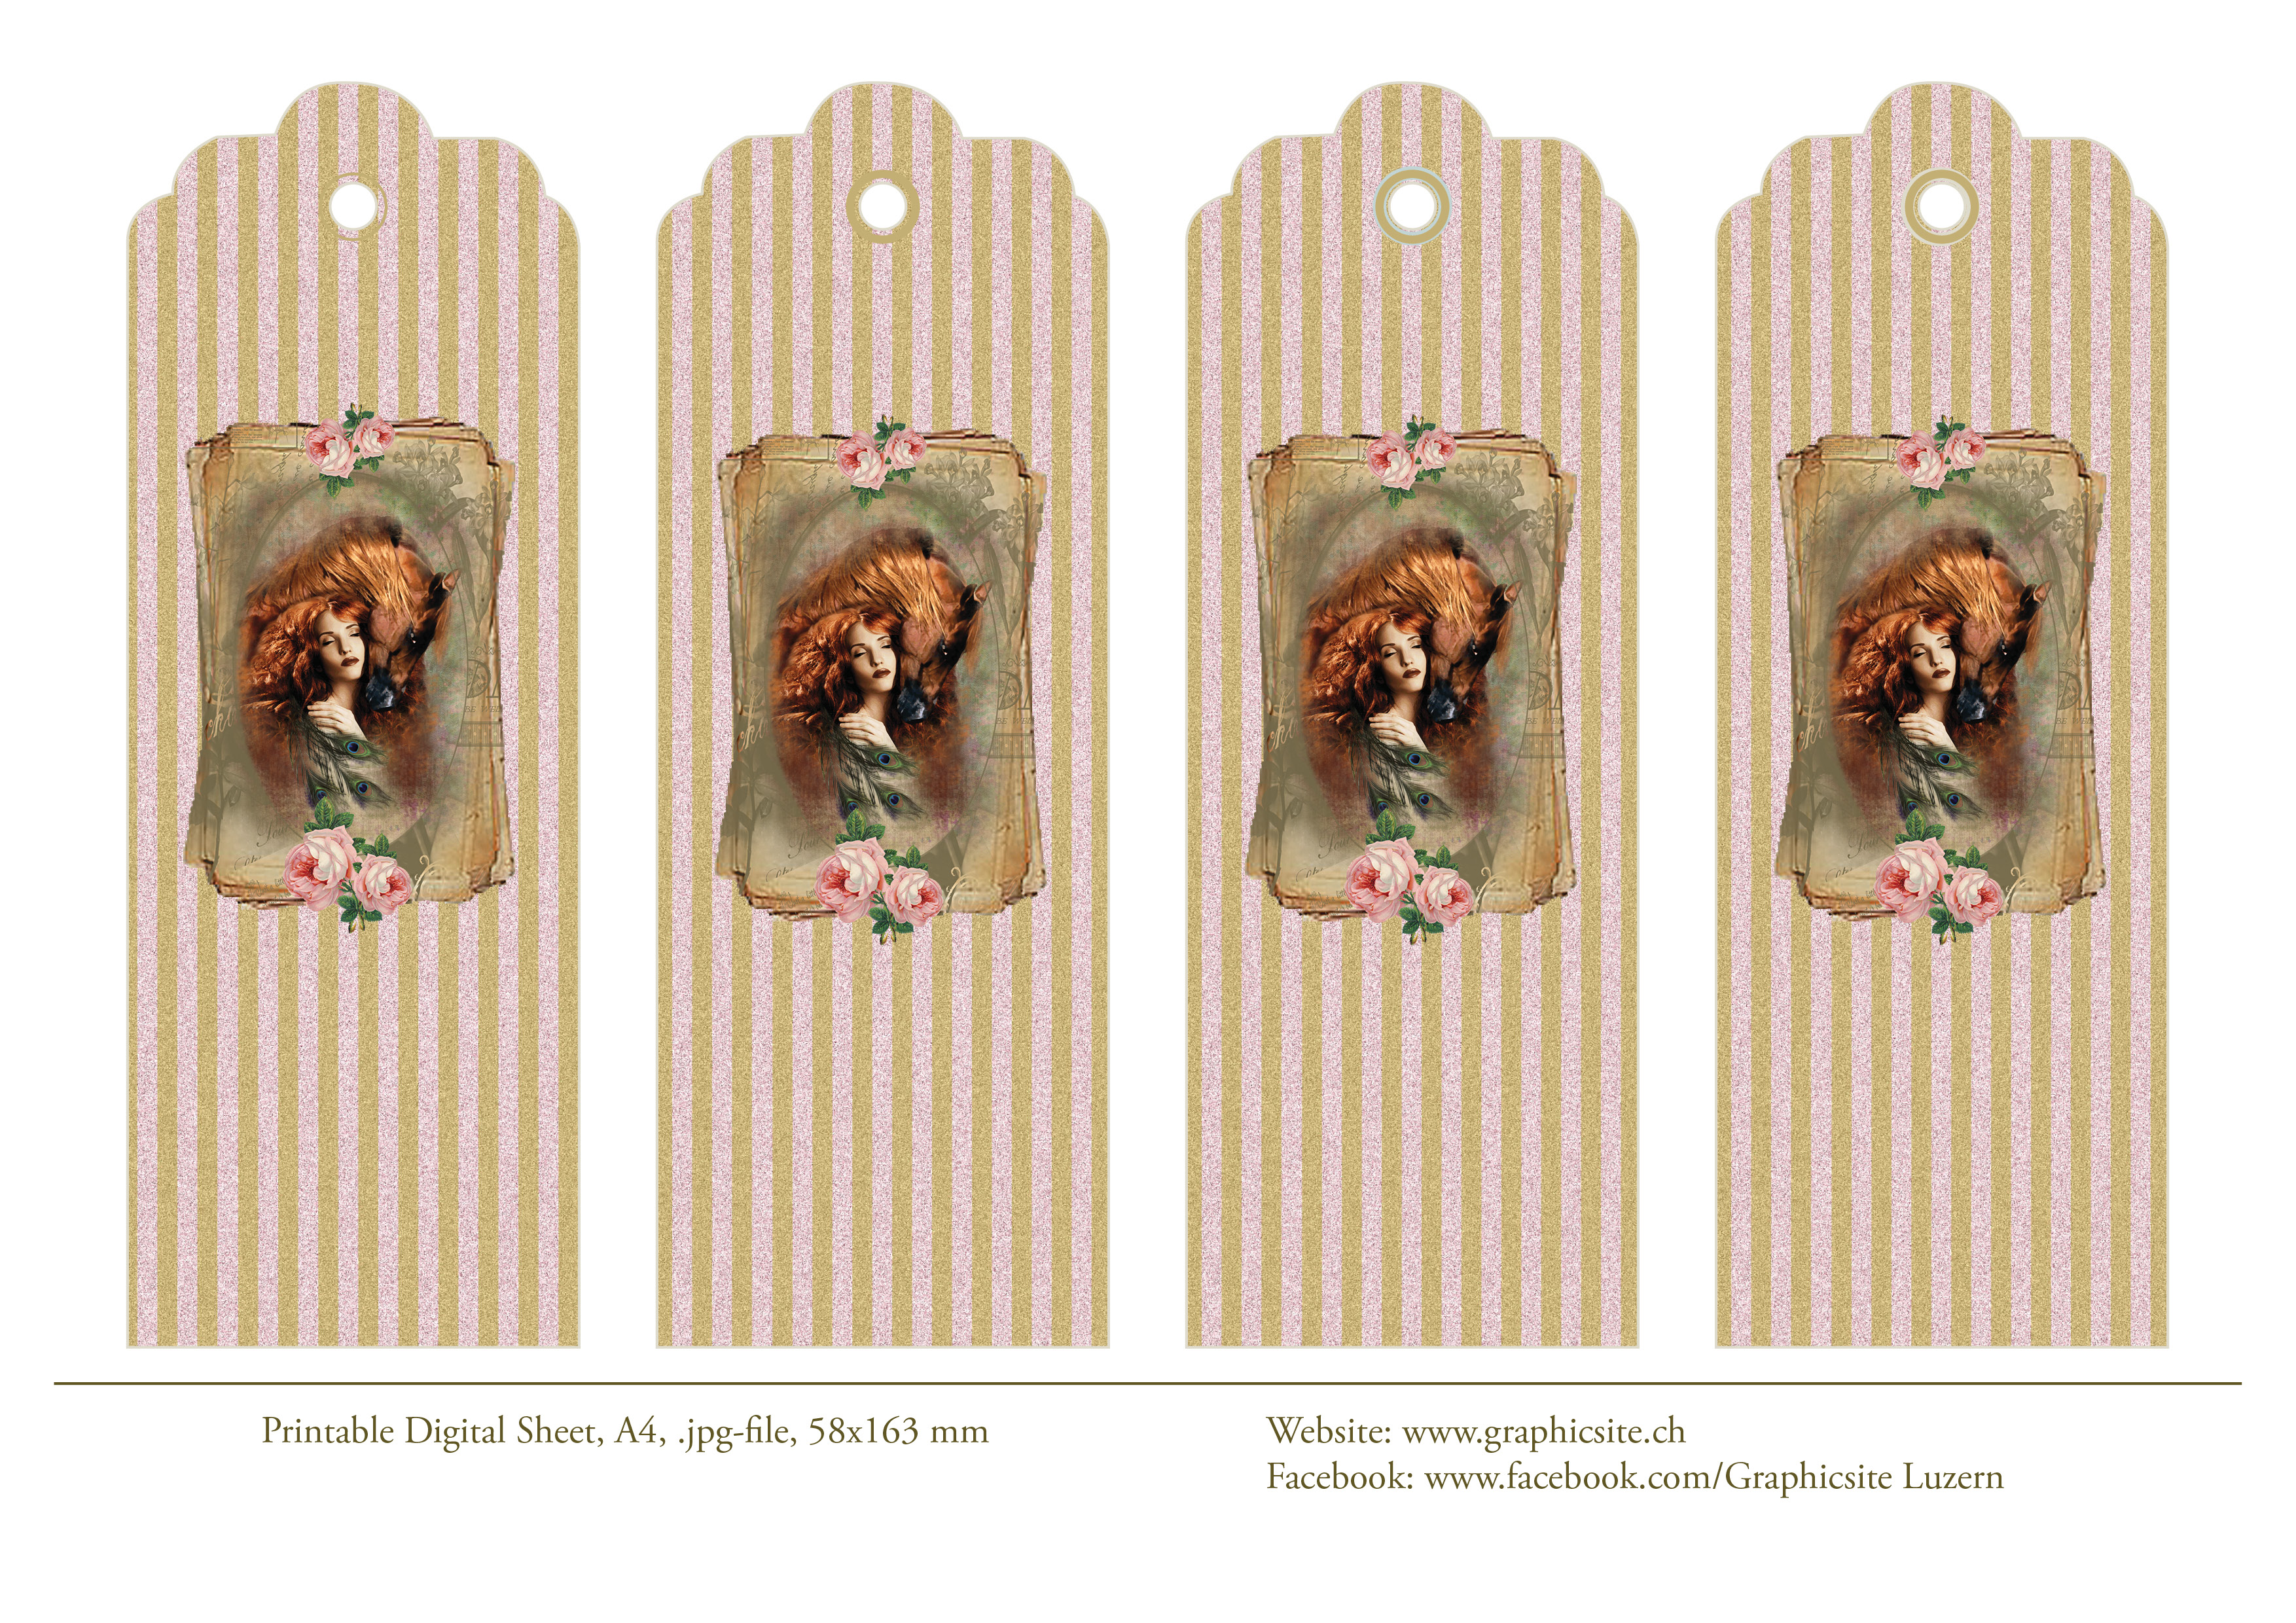 Printable Digital Collages - Bookmarks - Fire - VintageEdition